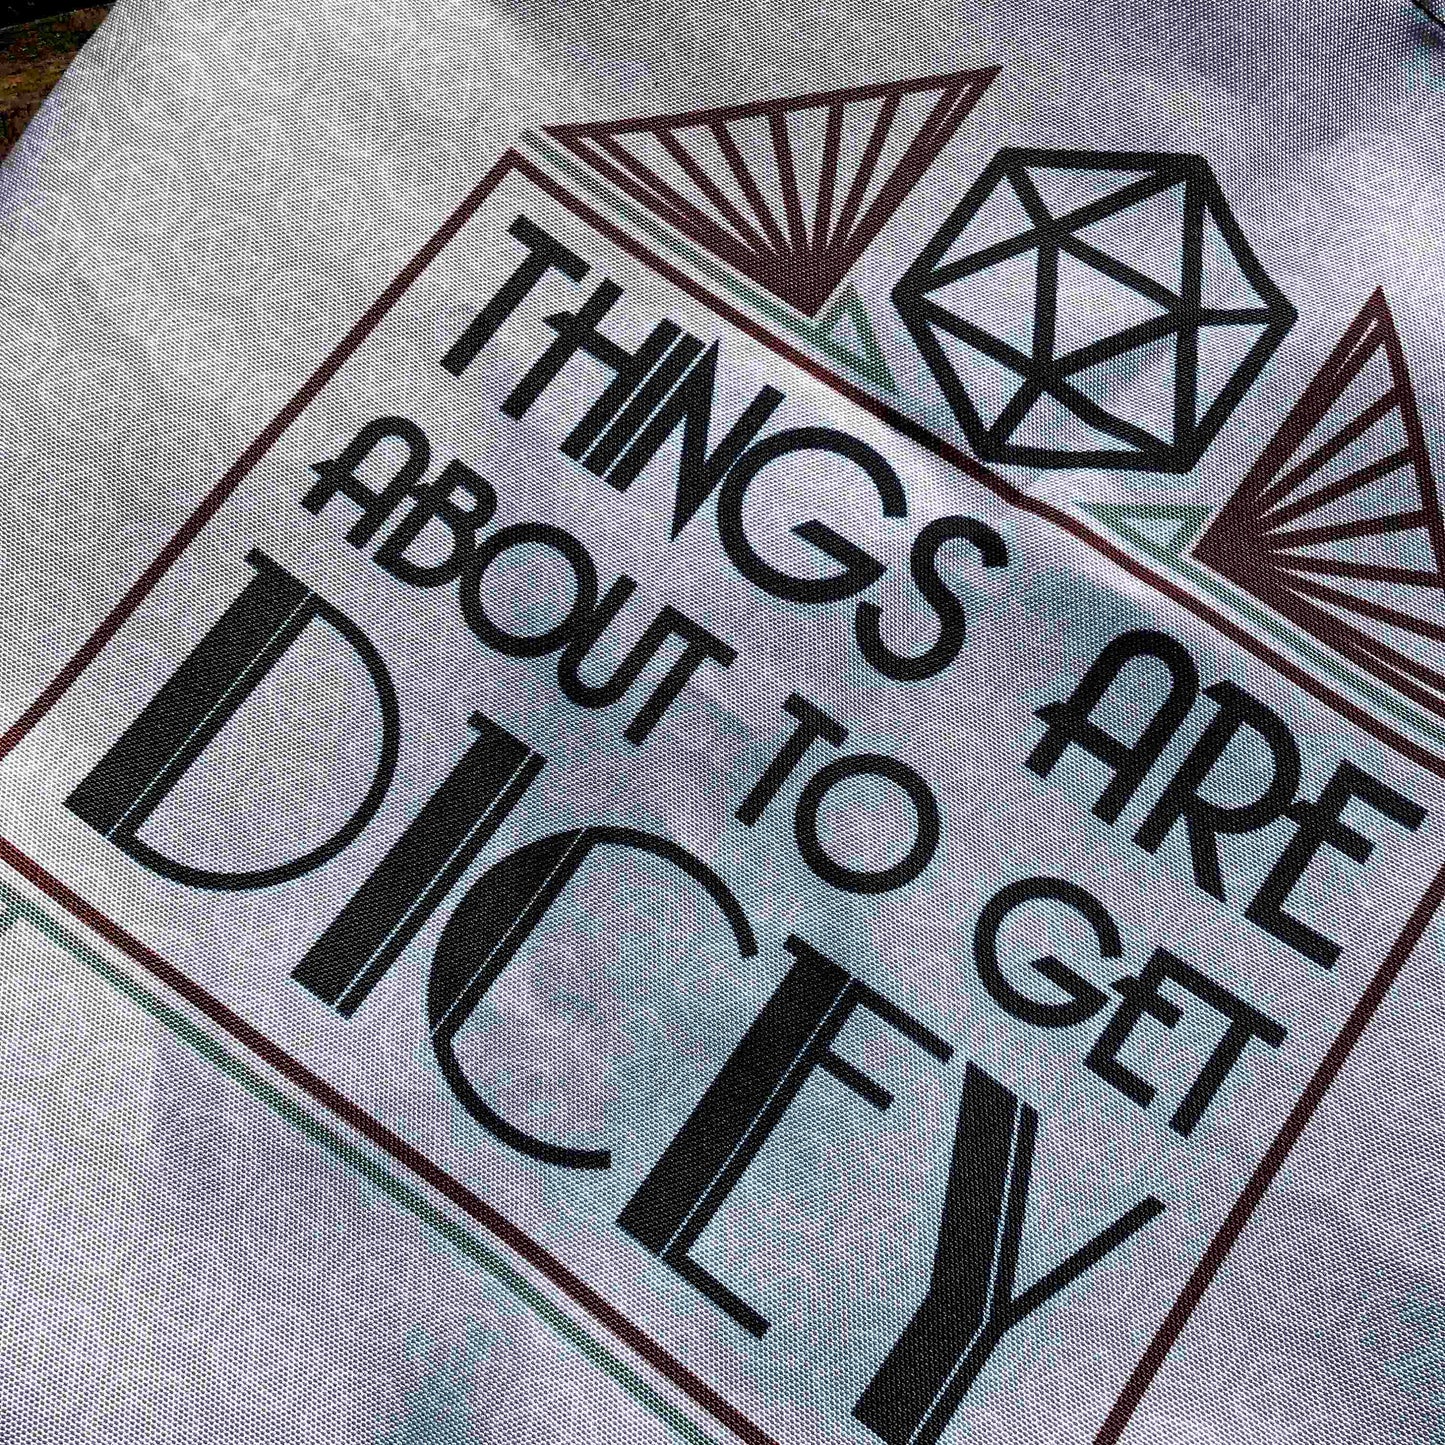 Things are About to Get Dicey - Tote Bag